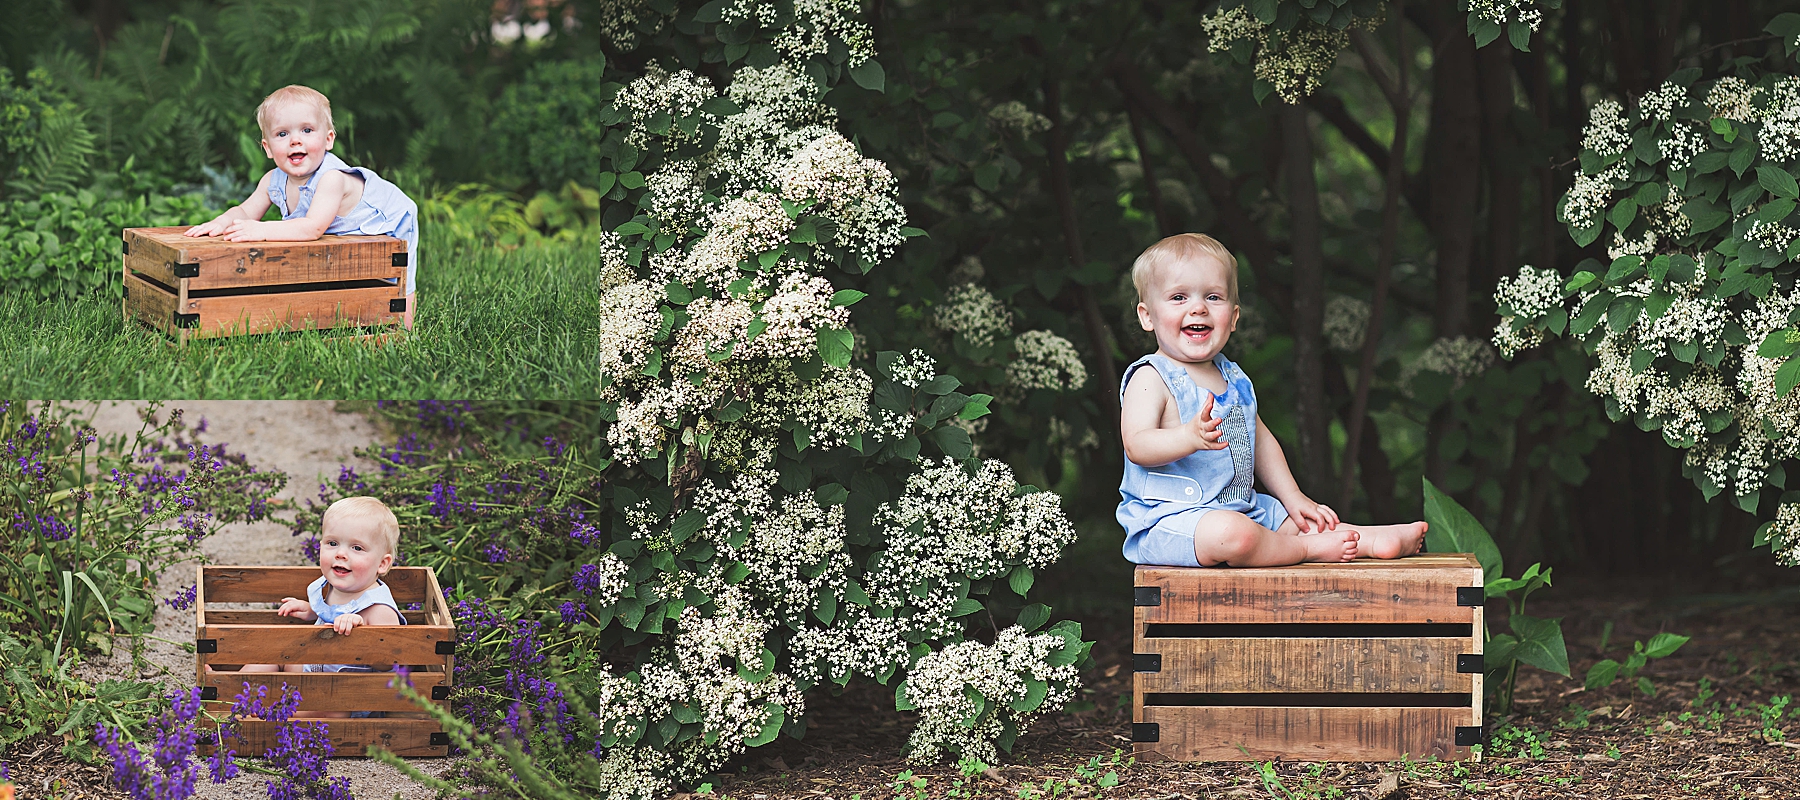 little boy on a box posing for photo how to take good pictures kristina rose photography